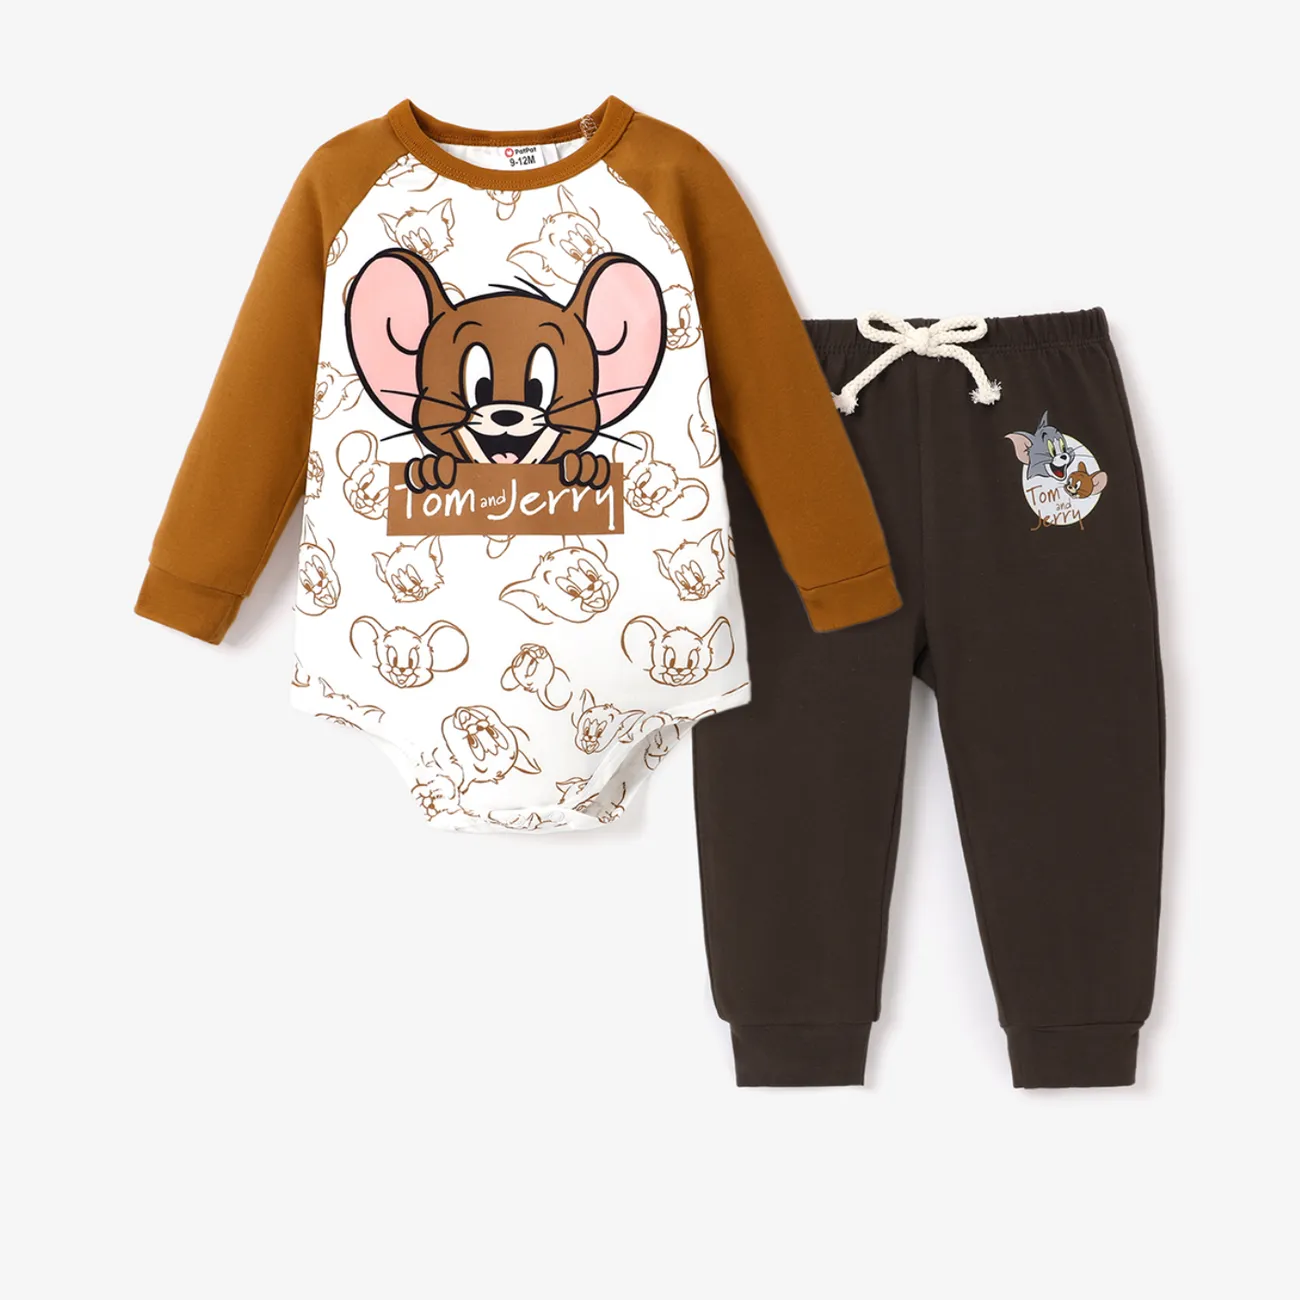 Tom and Jerry baby boy character graphic A romper or a pair of pants to wear with Brown big image 1